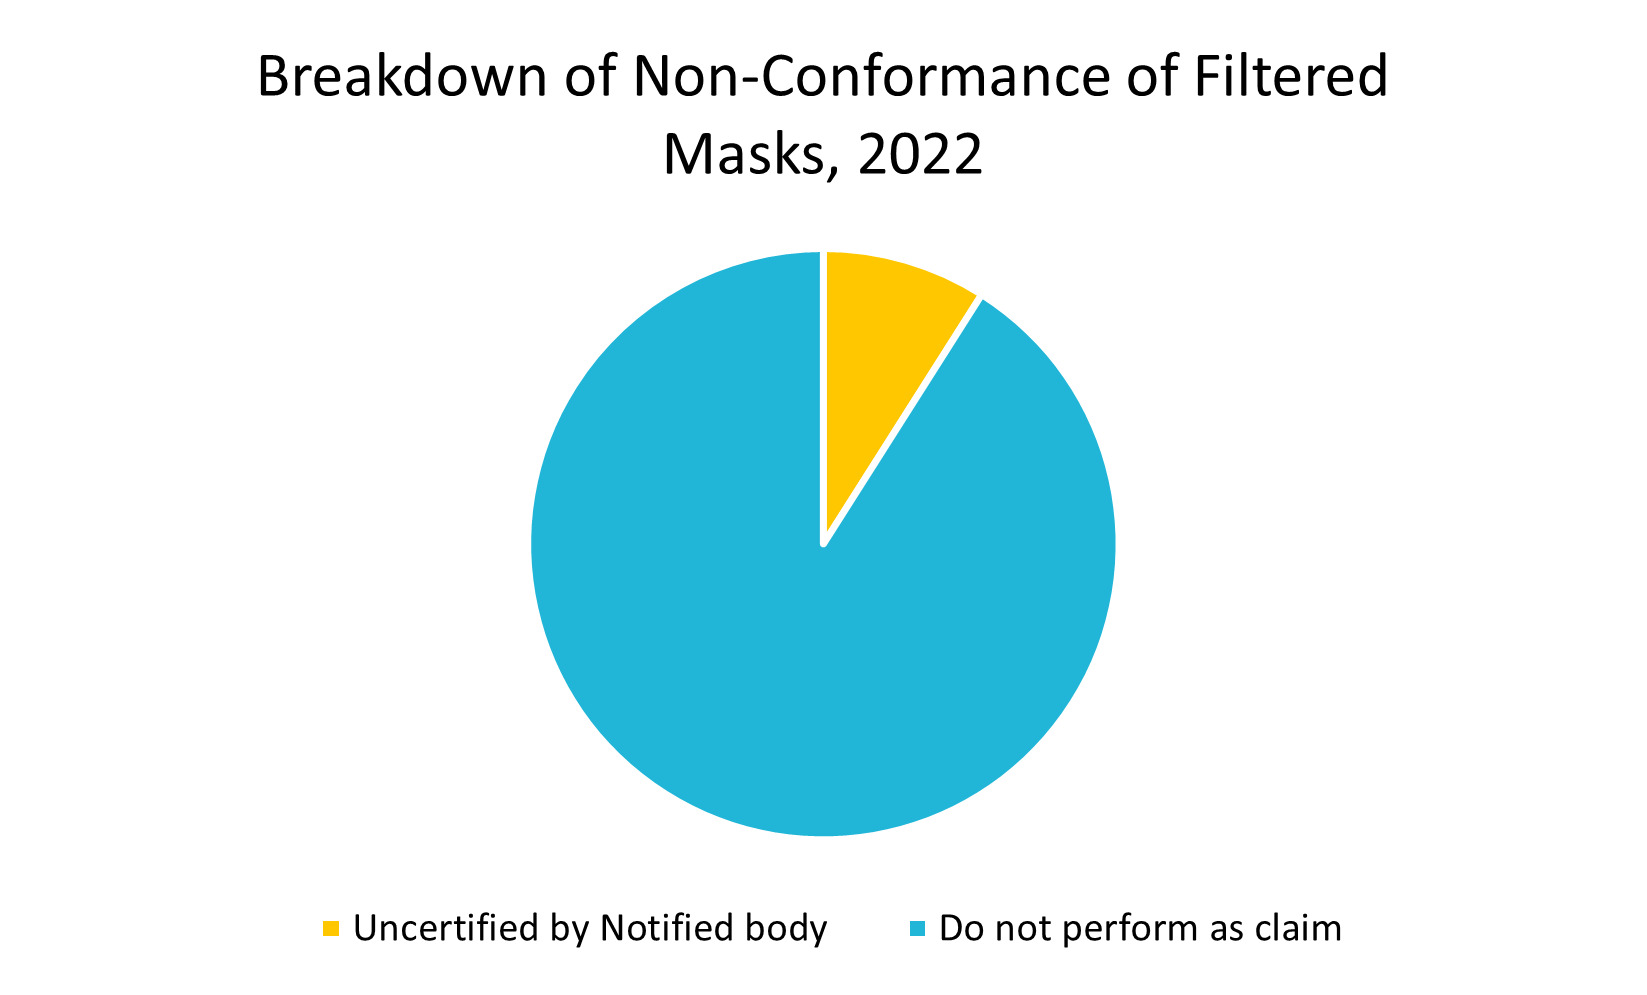 Chart depicting the breakdown of non-comformance